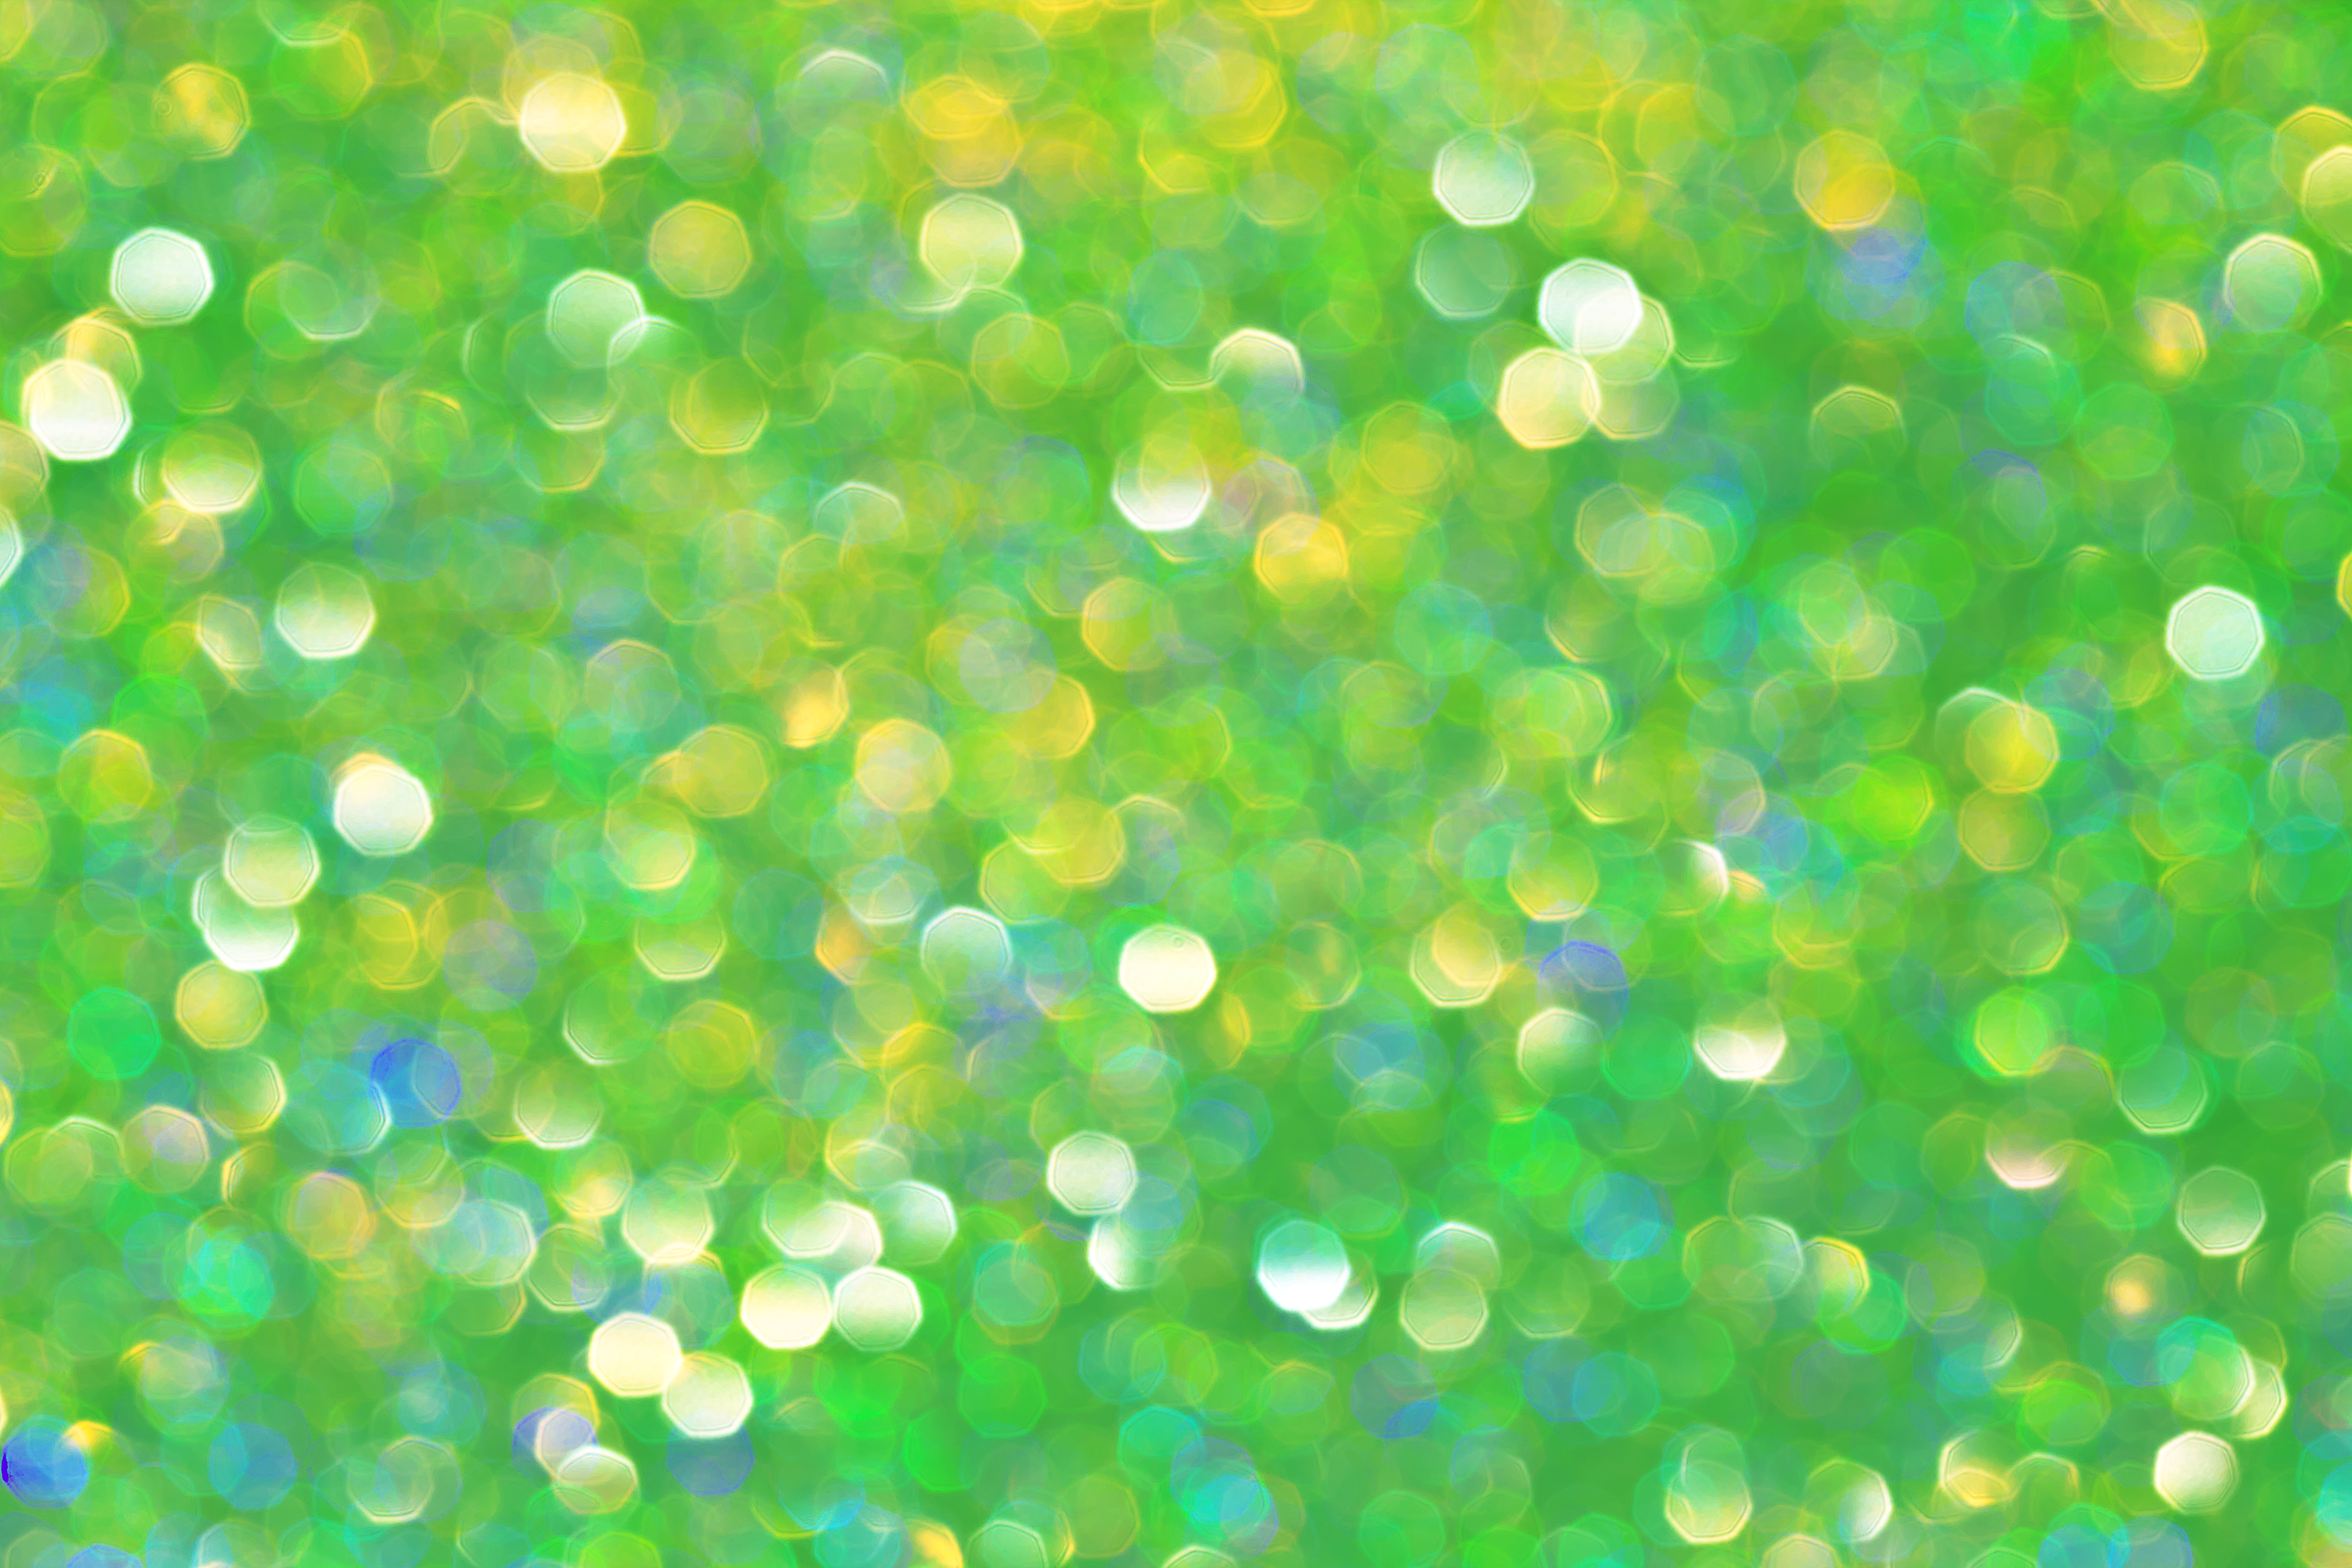 boquet, shine, glare, abstract, green, circles, brilliance, bokeh for android